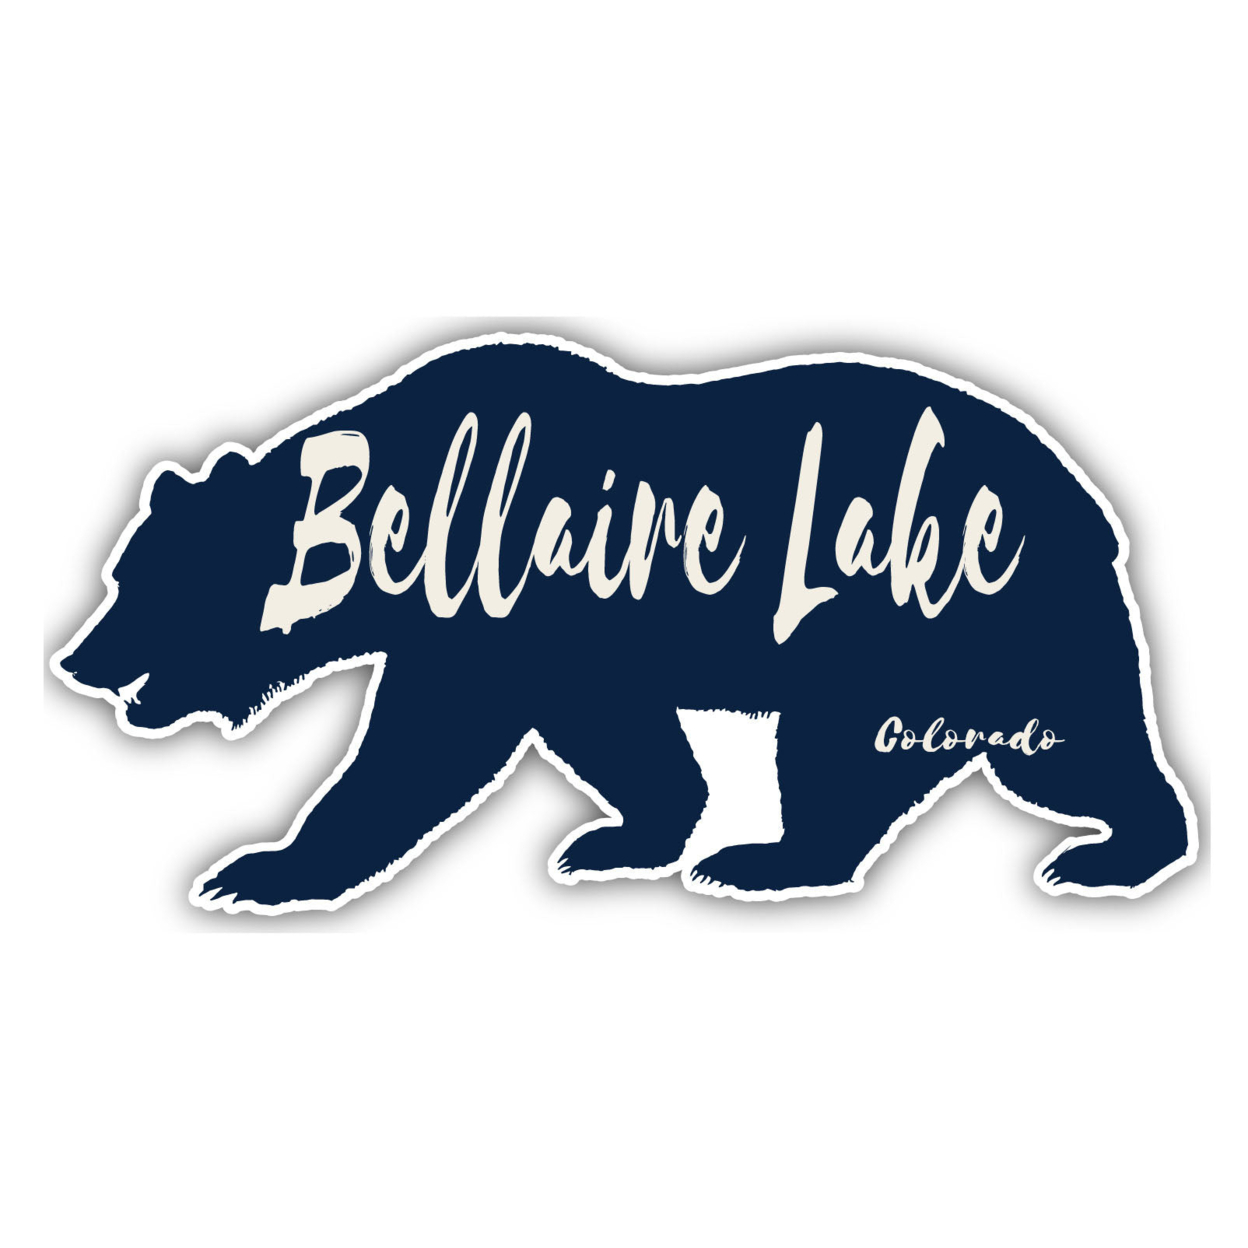 Bellaire Lake Colorado Souvenir Decorative Stickers (Choose Theme And Size) - 4-Pack, 12-Inch, Bear